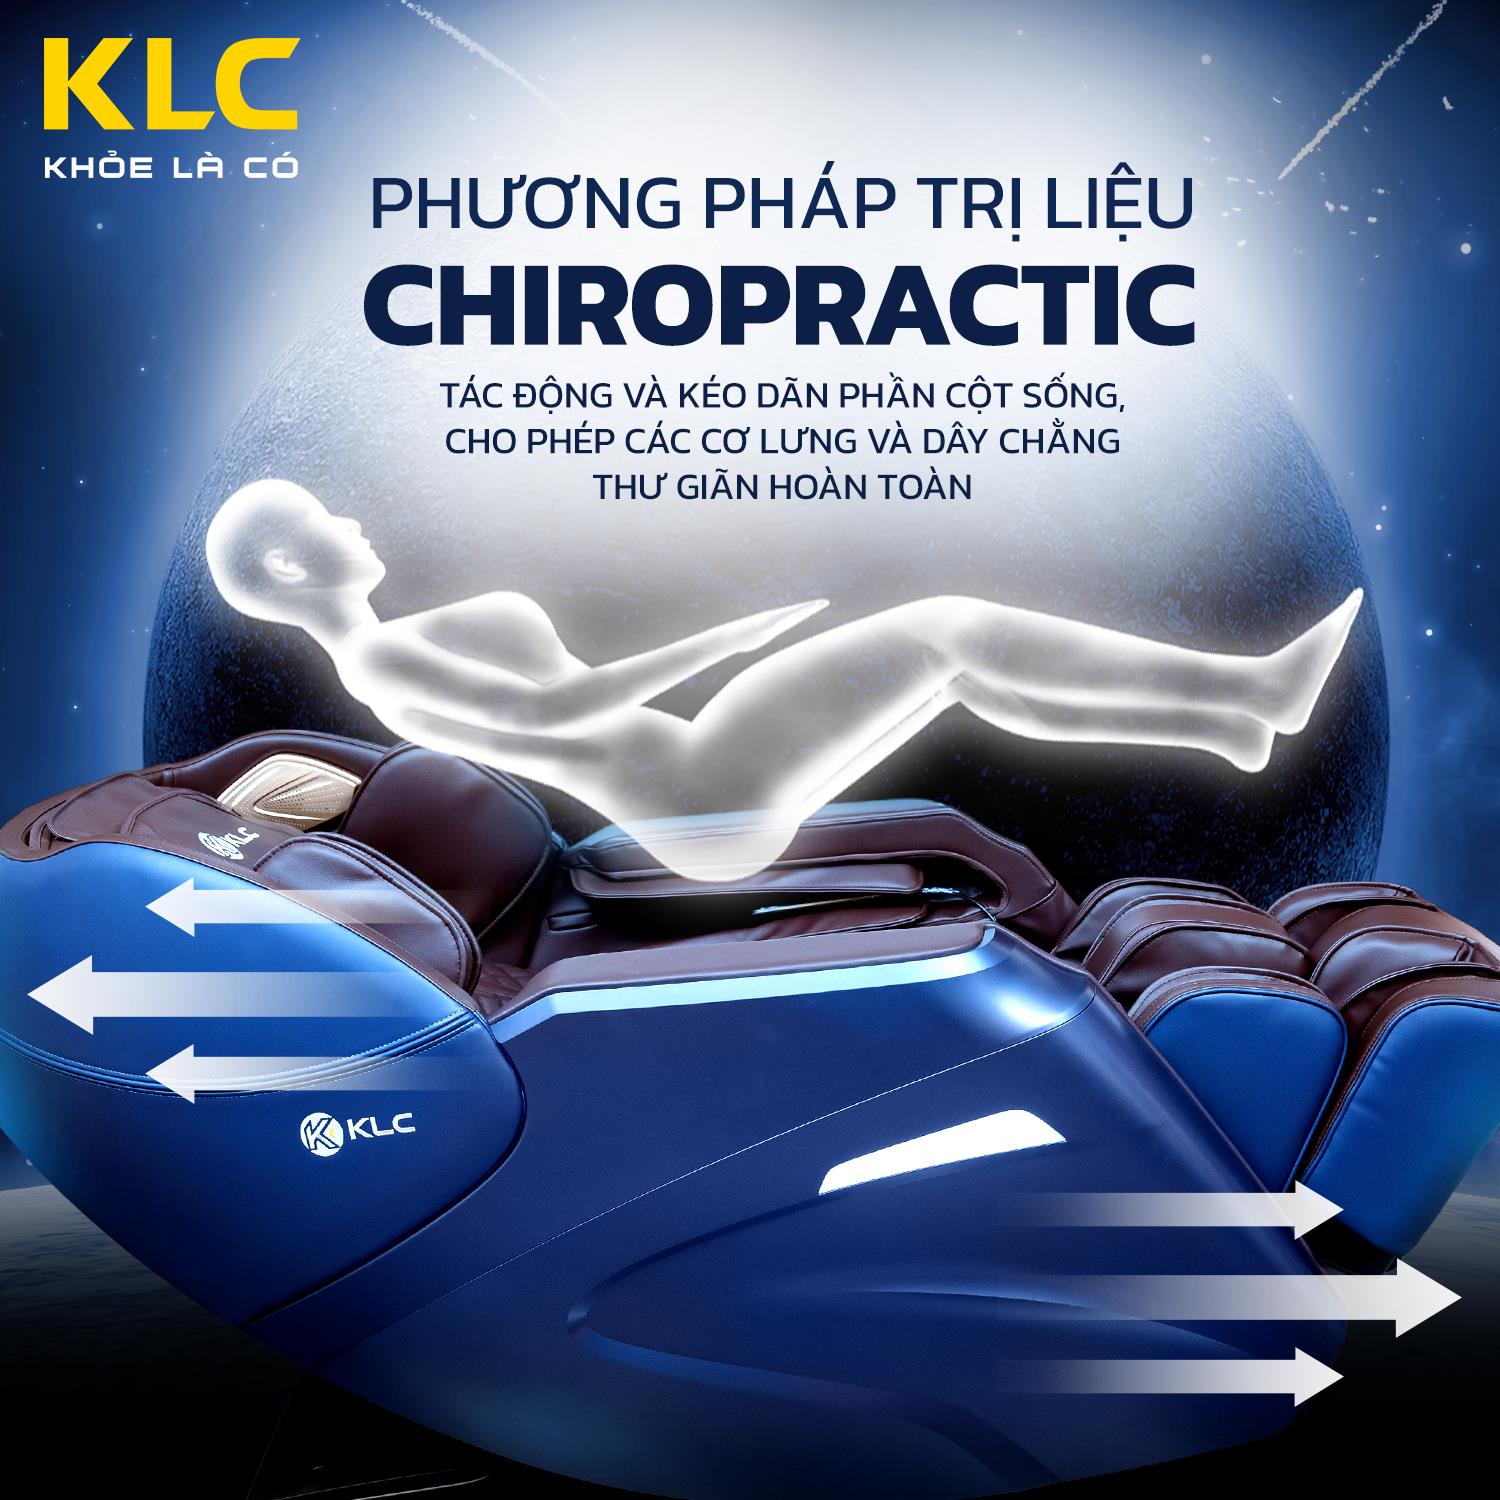 KLC massage chair contributes to golden health - Photo 2.